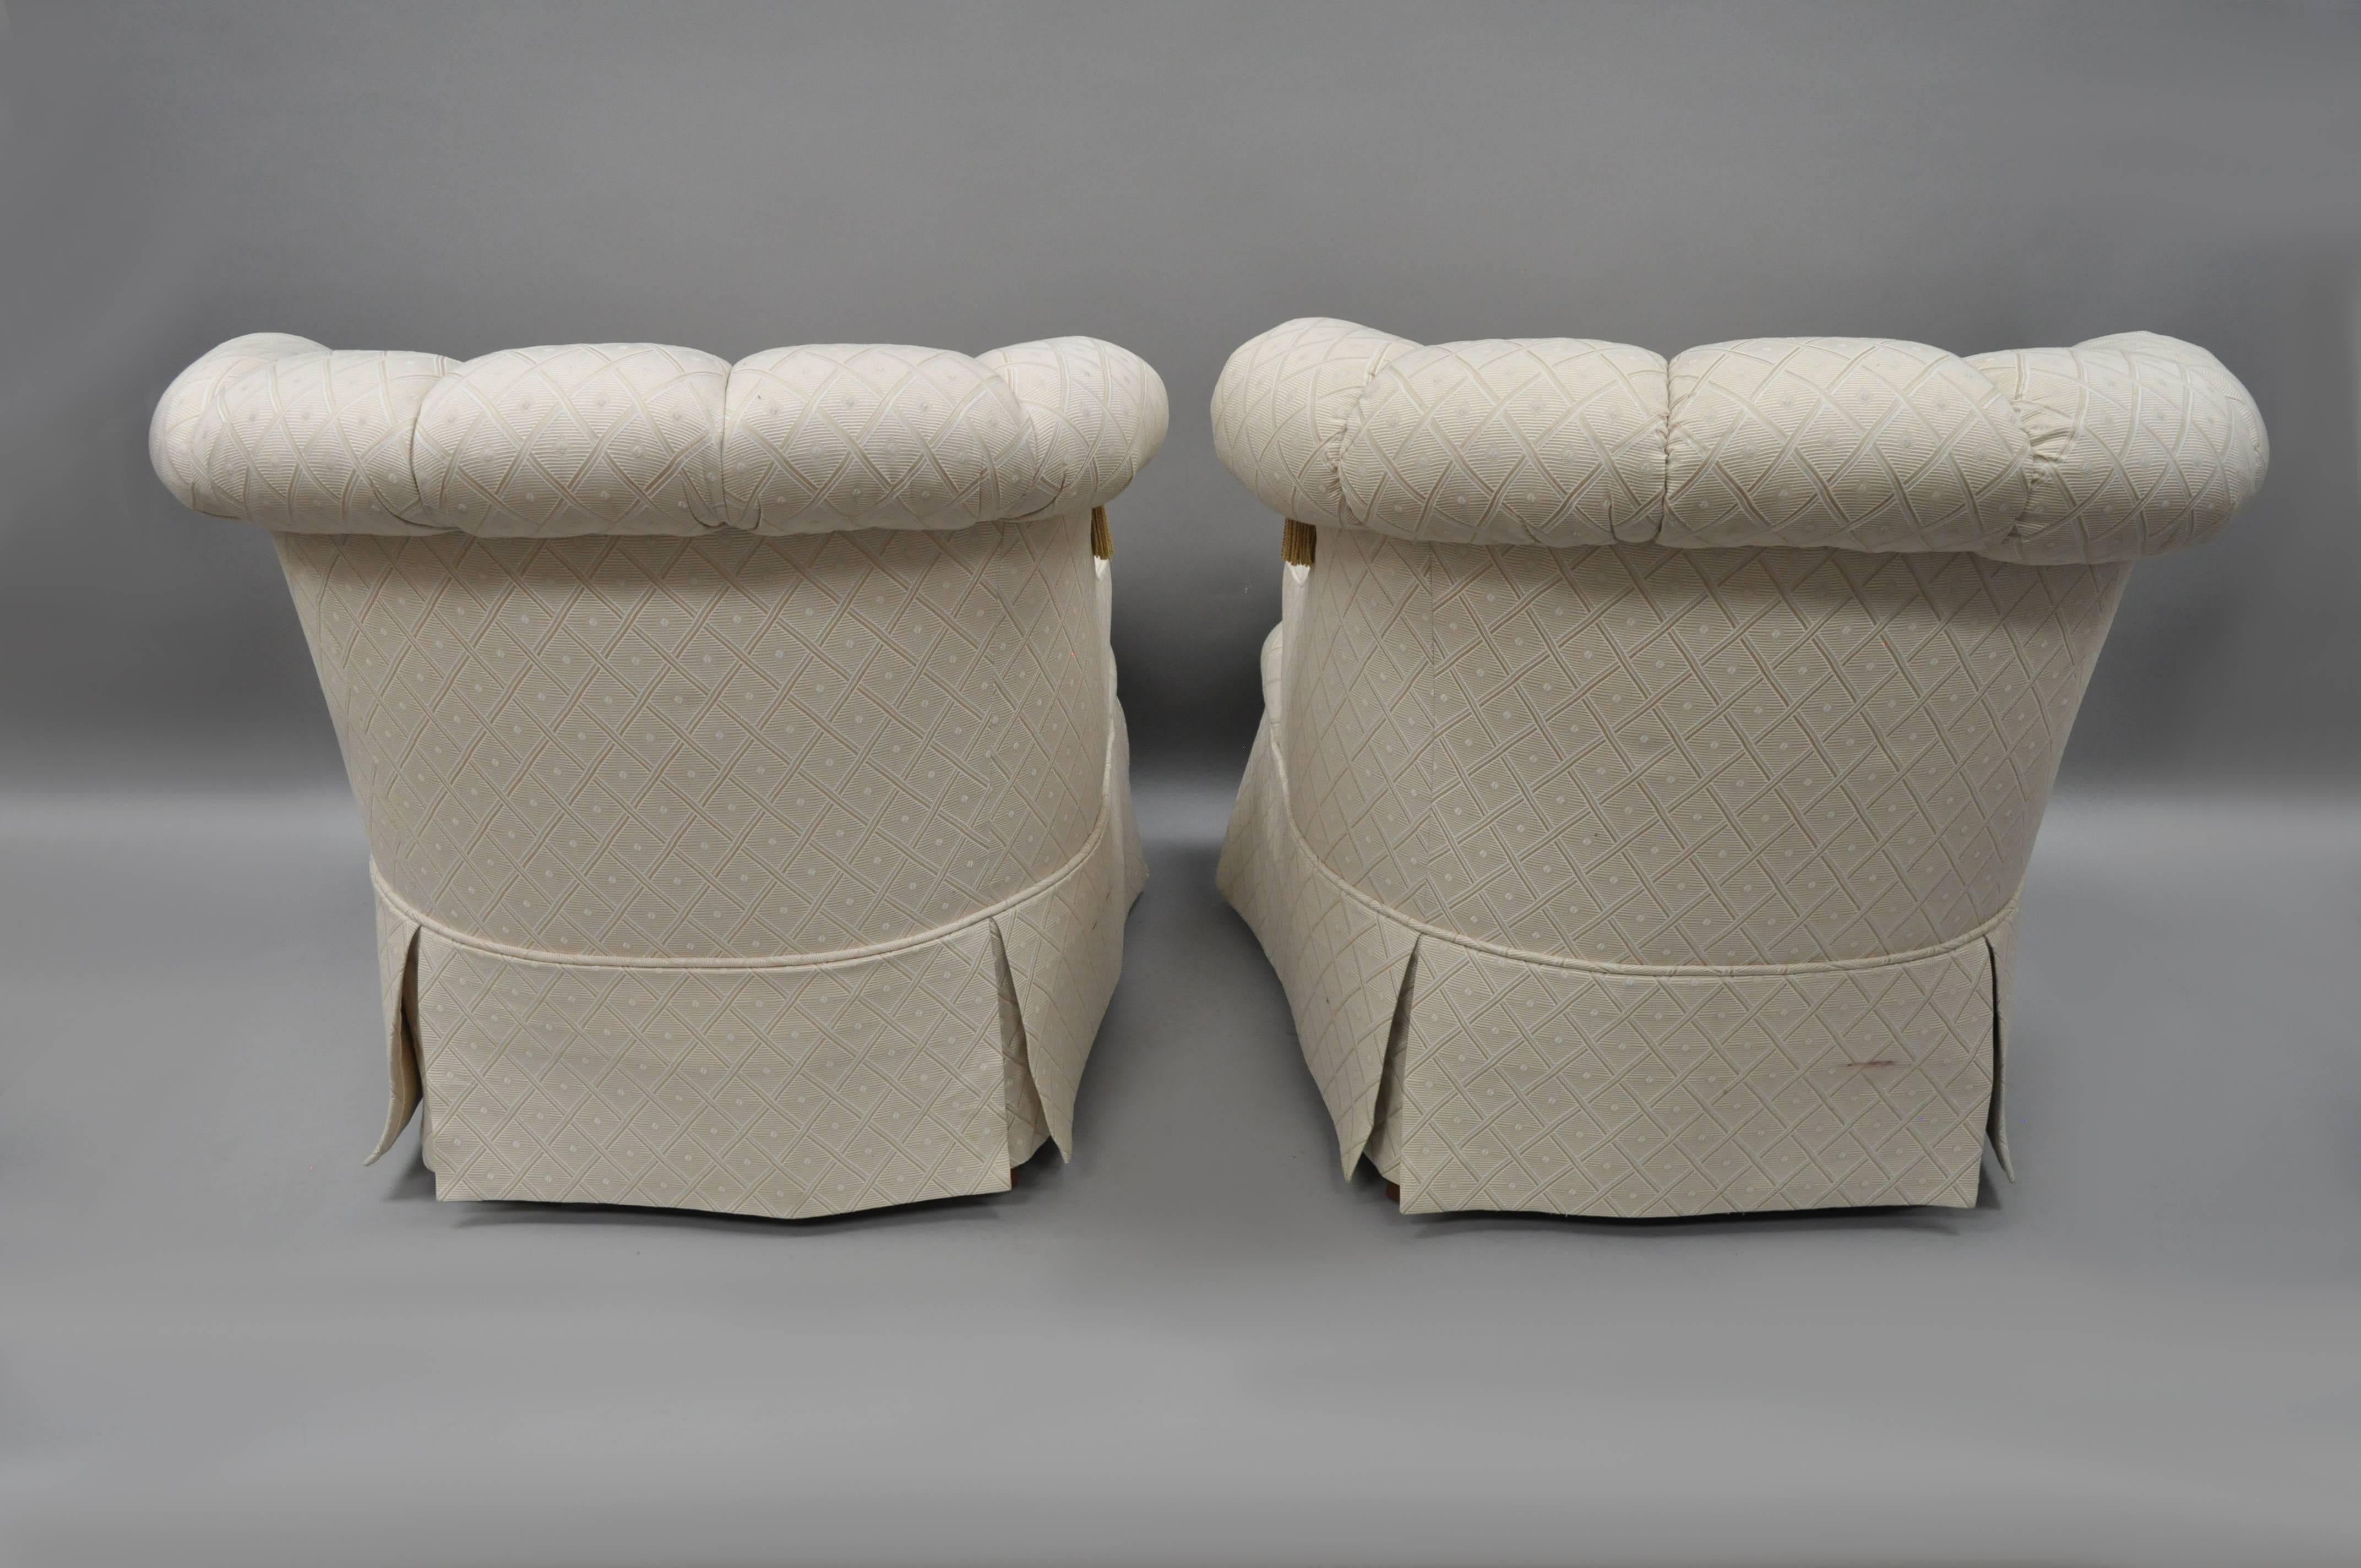 American Pair of Napoleon III Tufted Slipper Lounge Chairs by Tomlinson Erwin-Lambeth